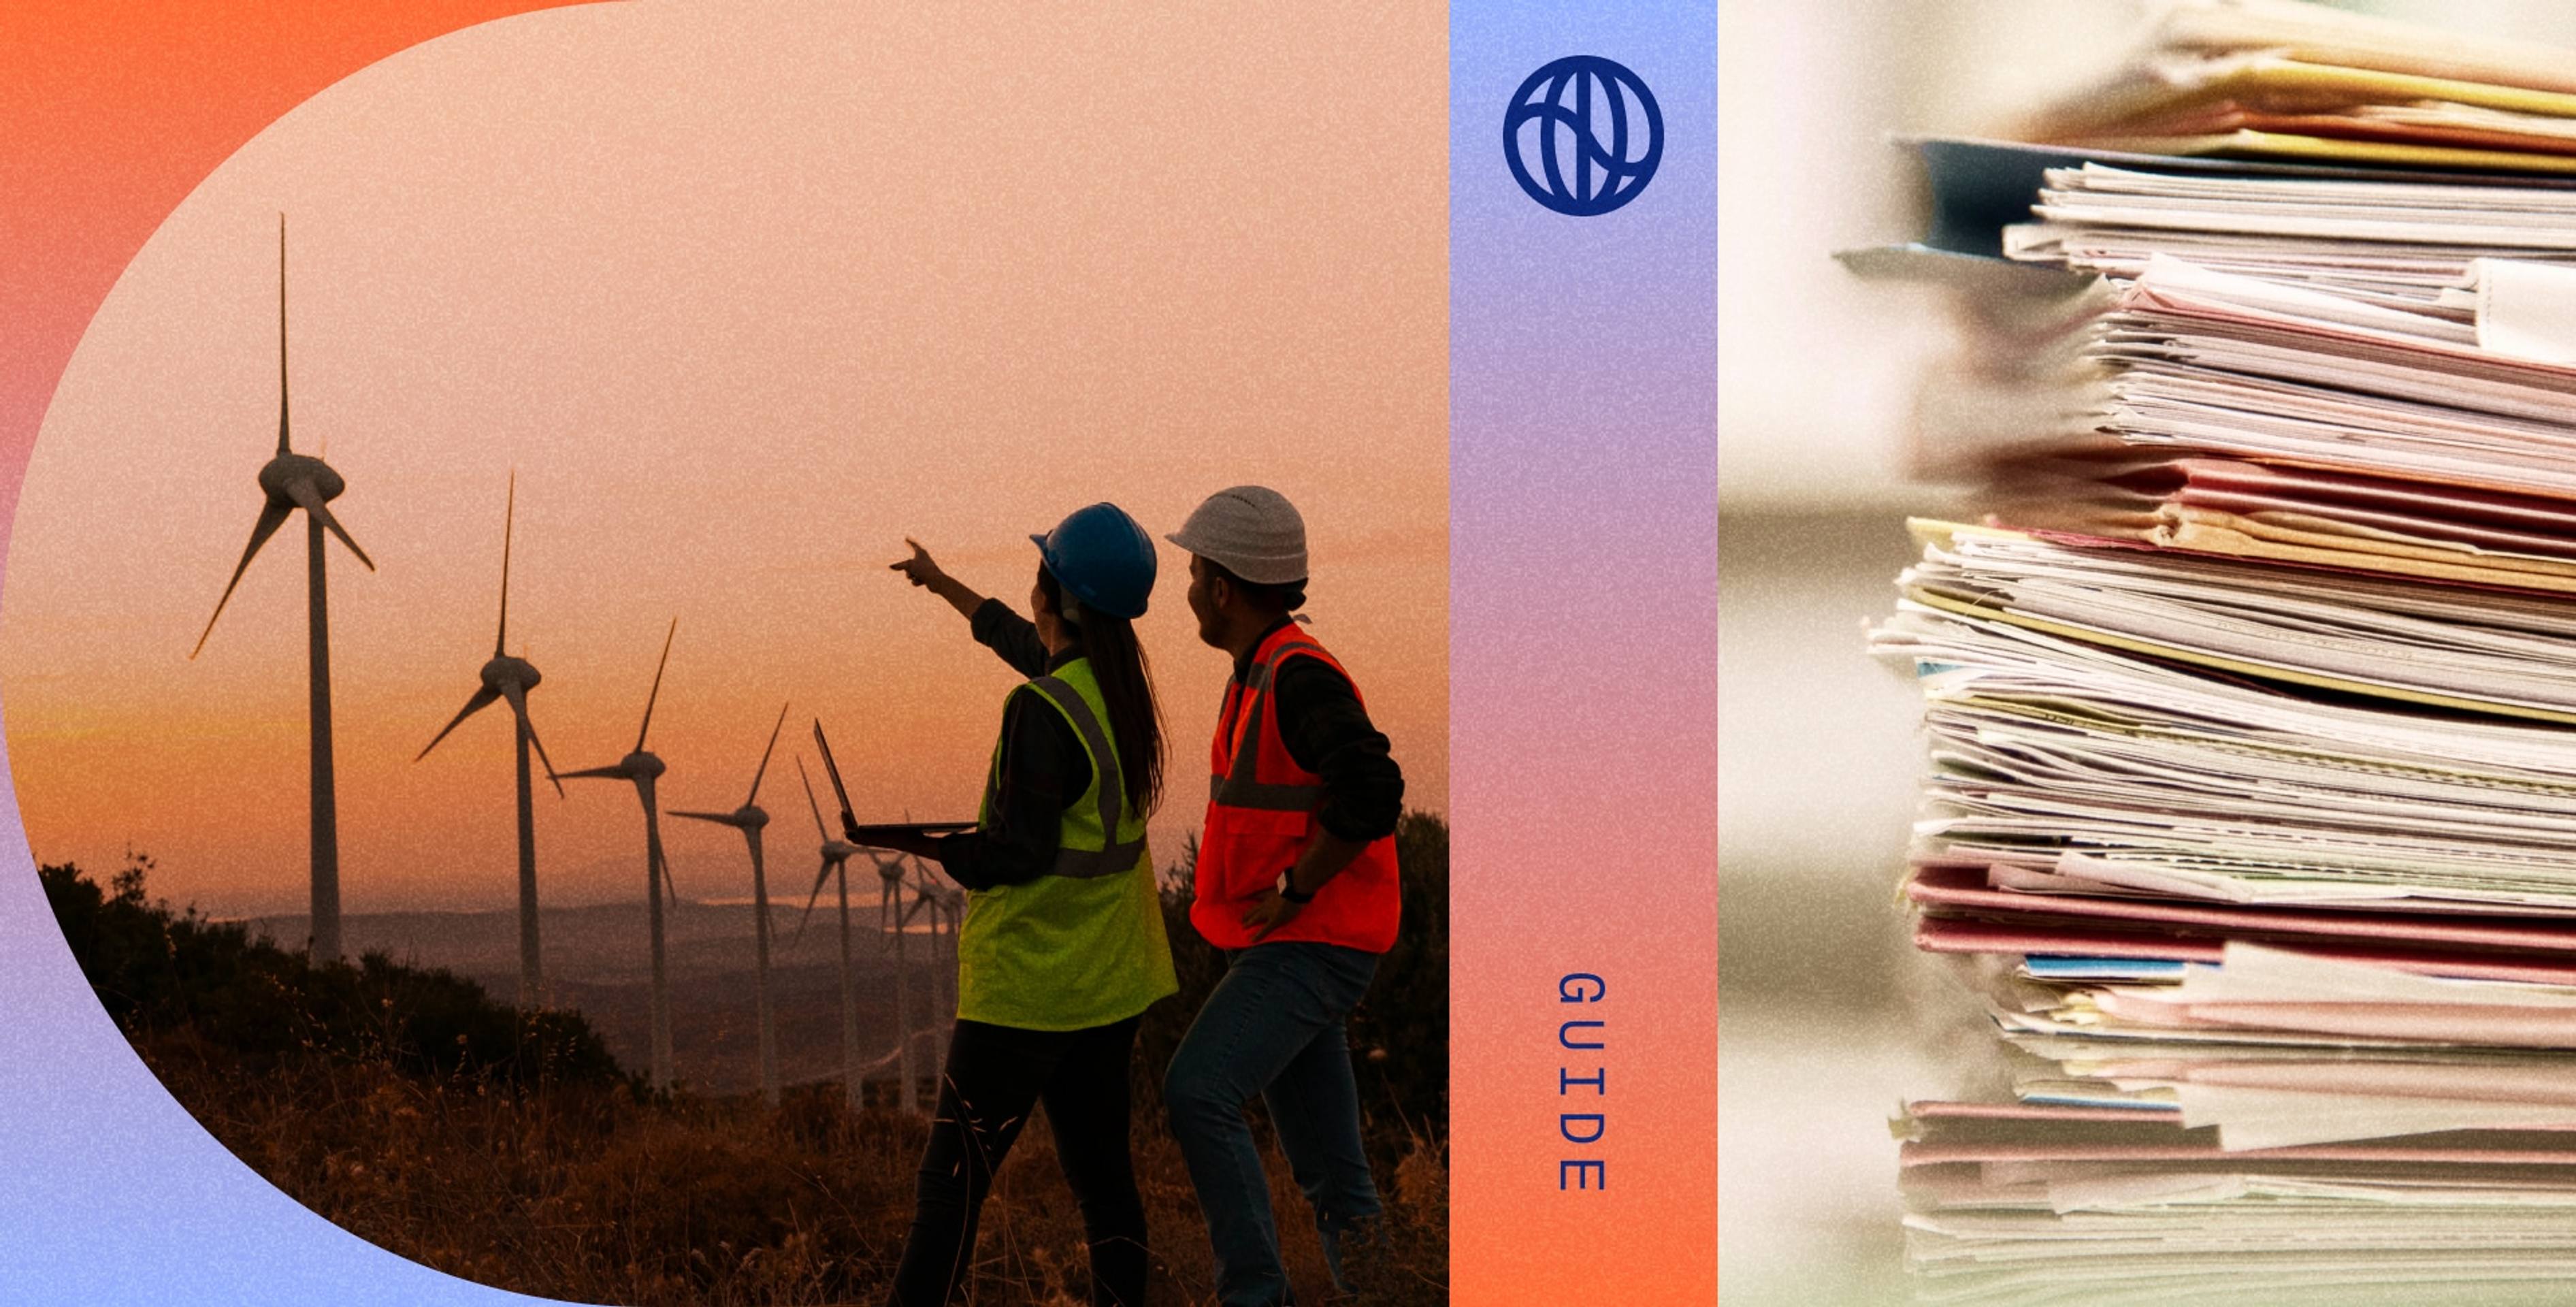 header image for a blog on audit preparation for climate data. A photo of workers looking at windmills and an image of a stack of papers